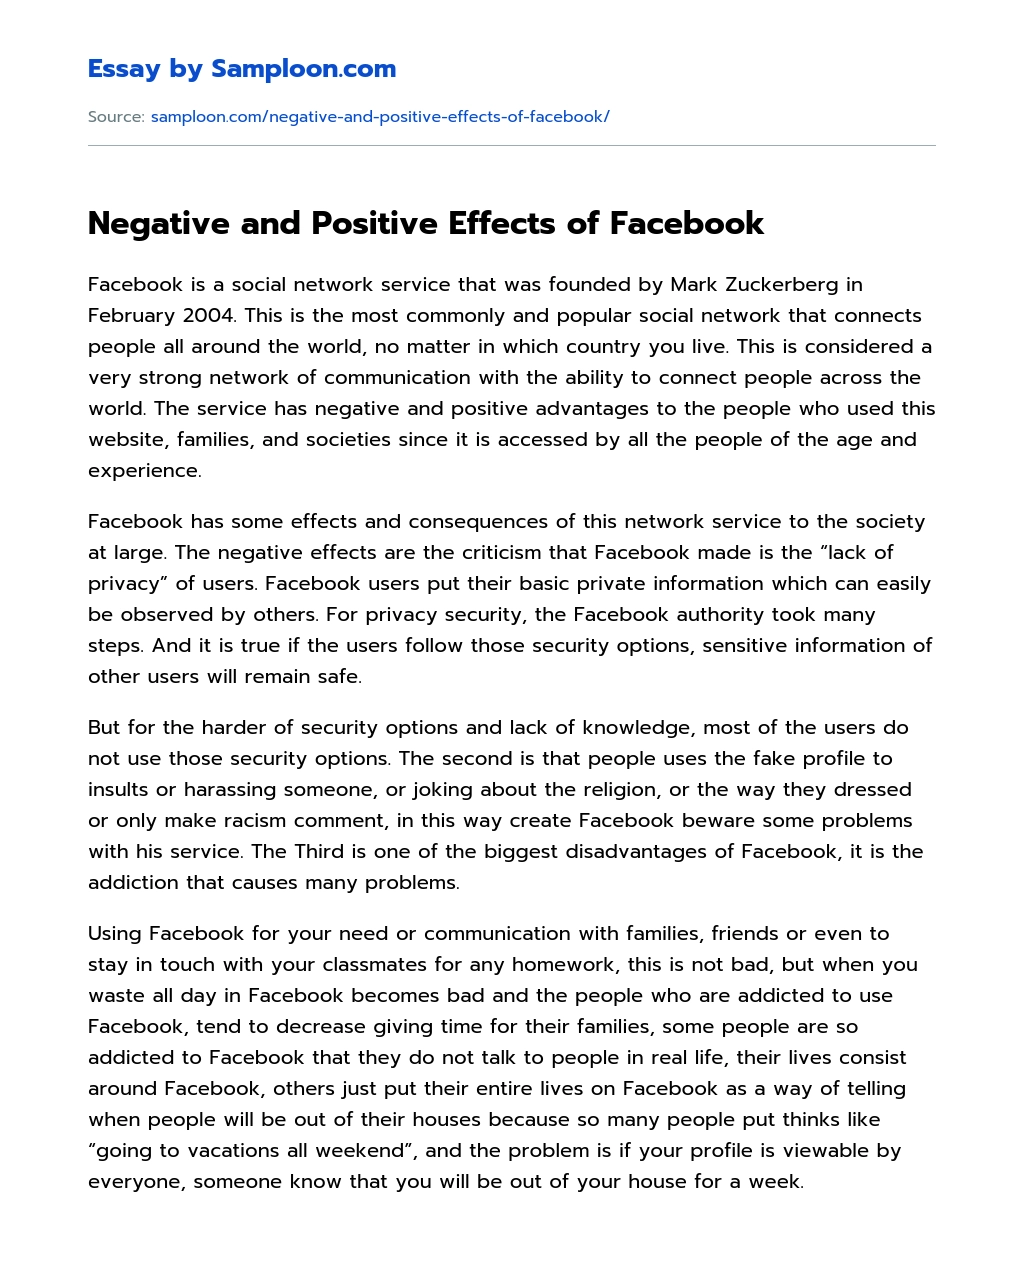 Negative and Positive Effects of Facebook essay